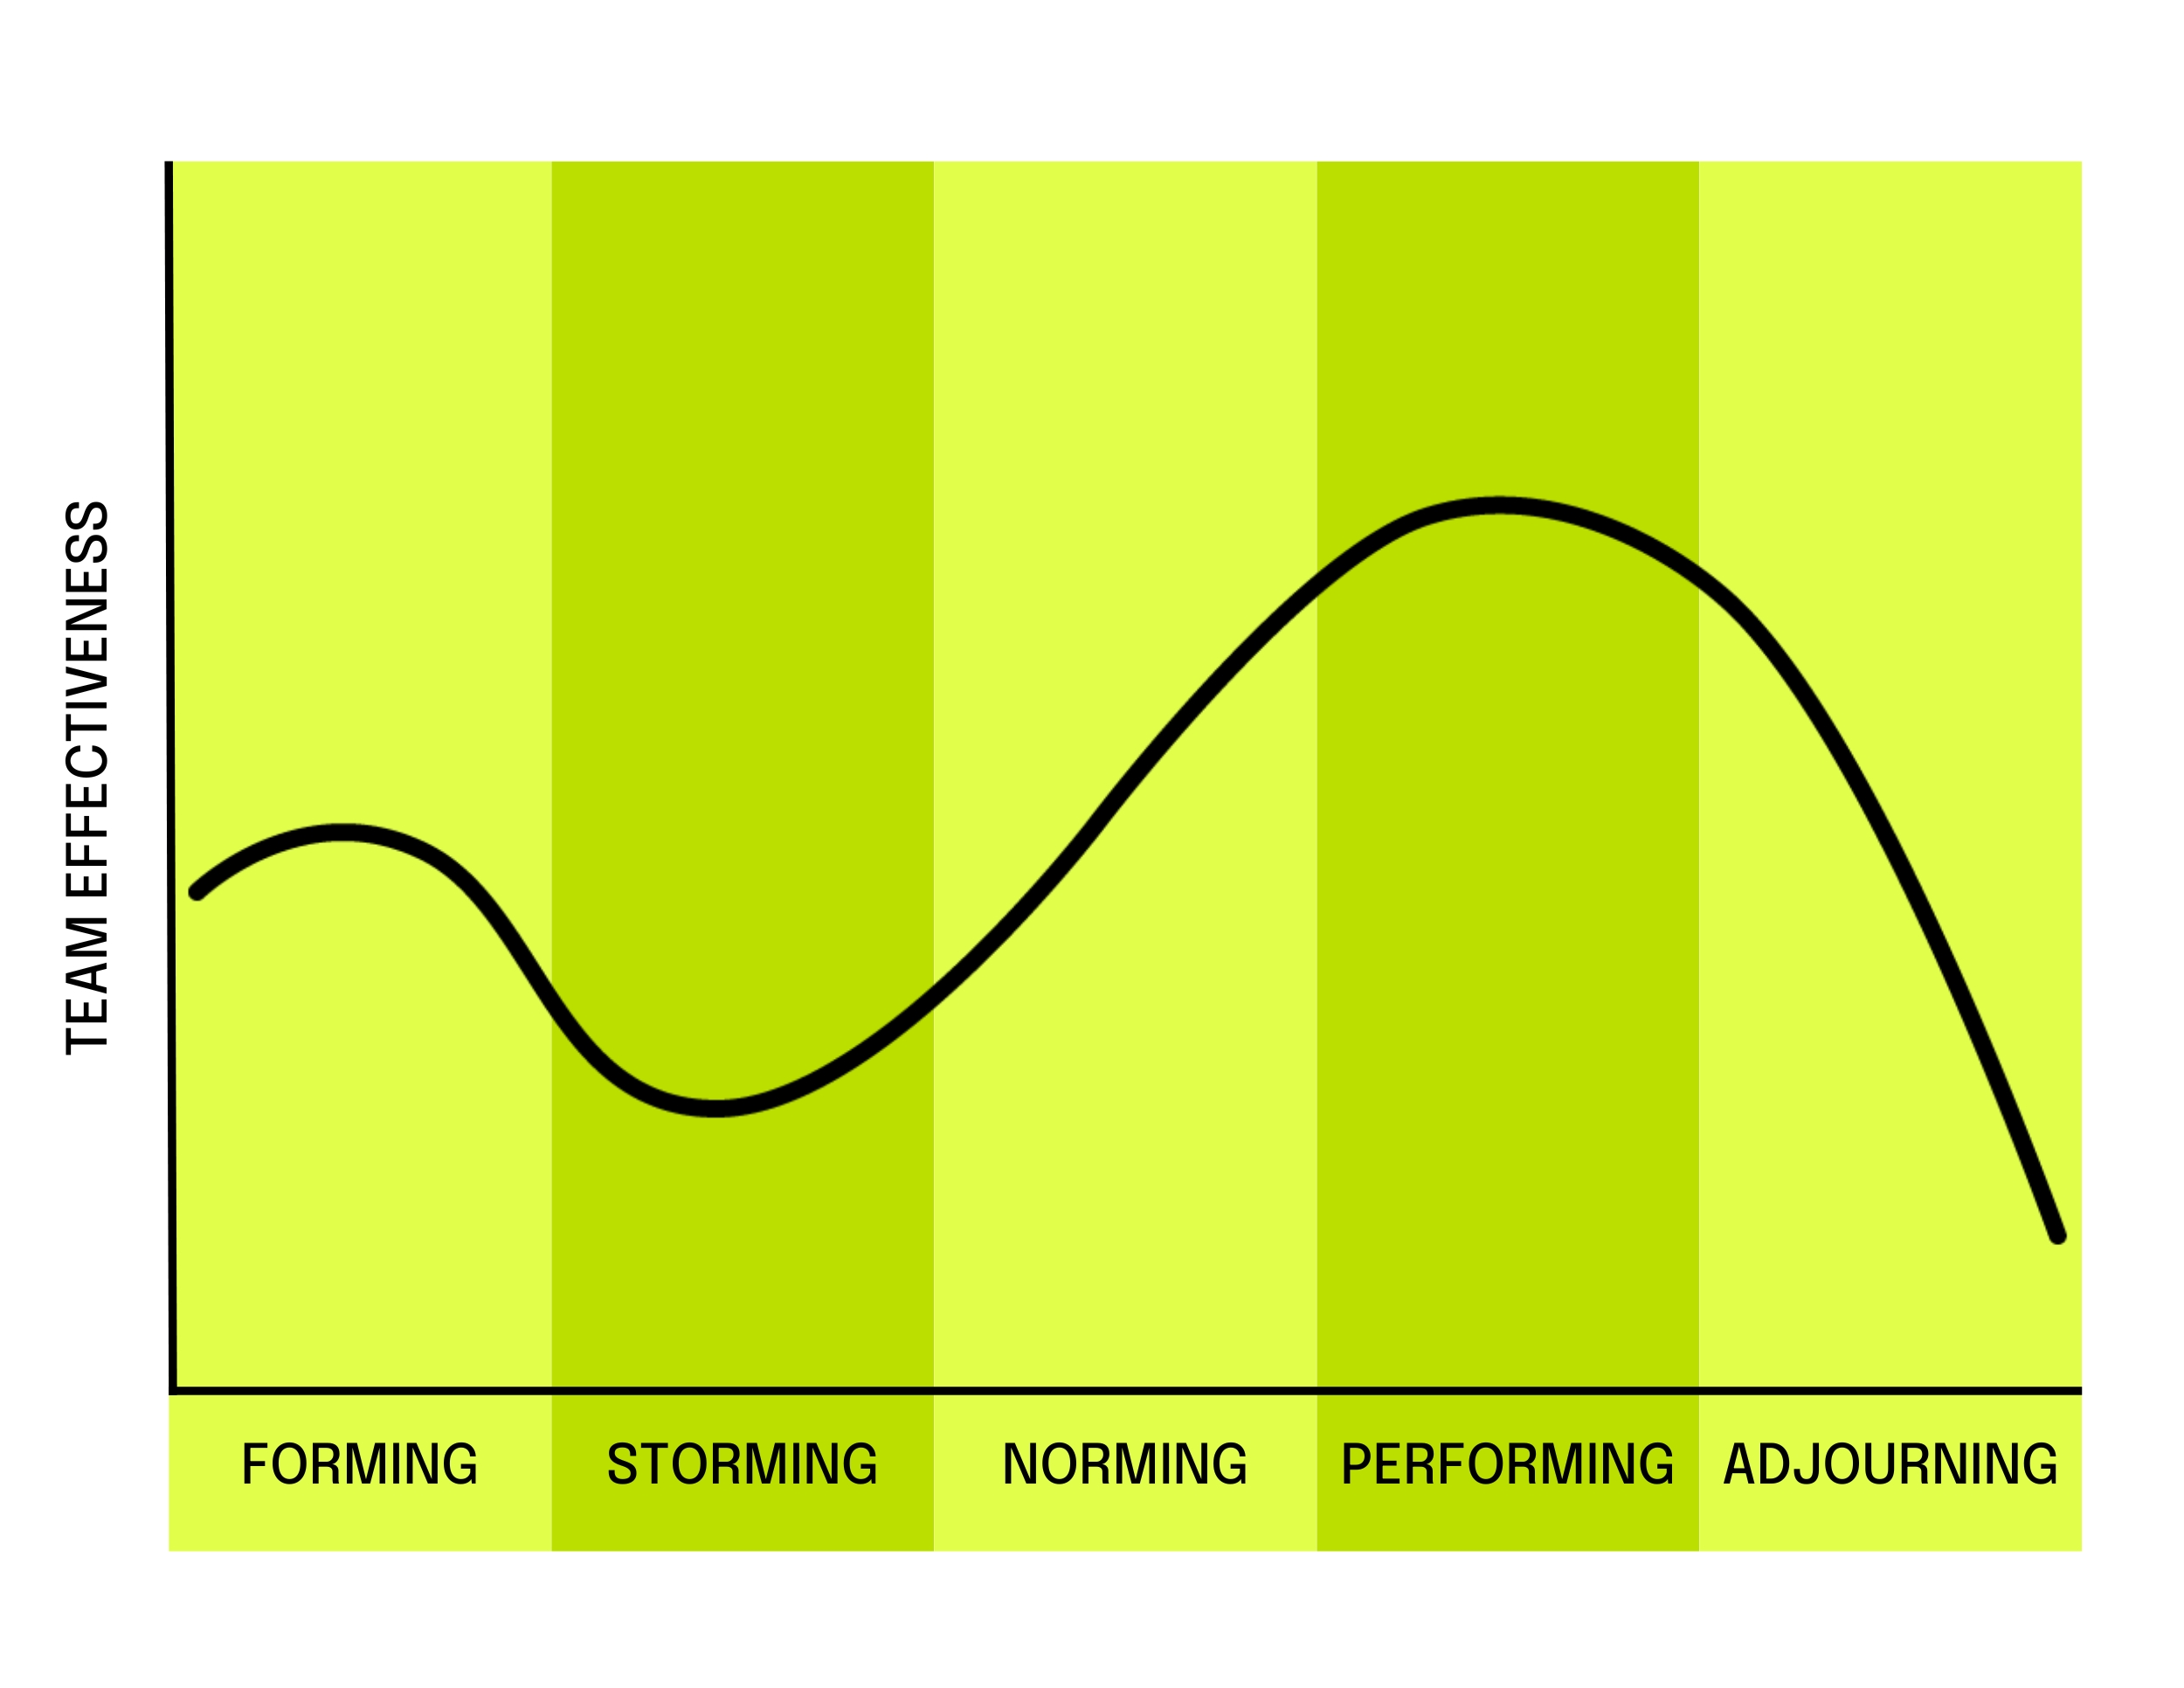 A graphic charting team effectiveness against five stages; forming, storming, norming, performing, and adjourning.